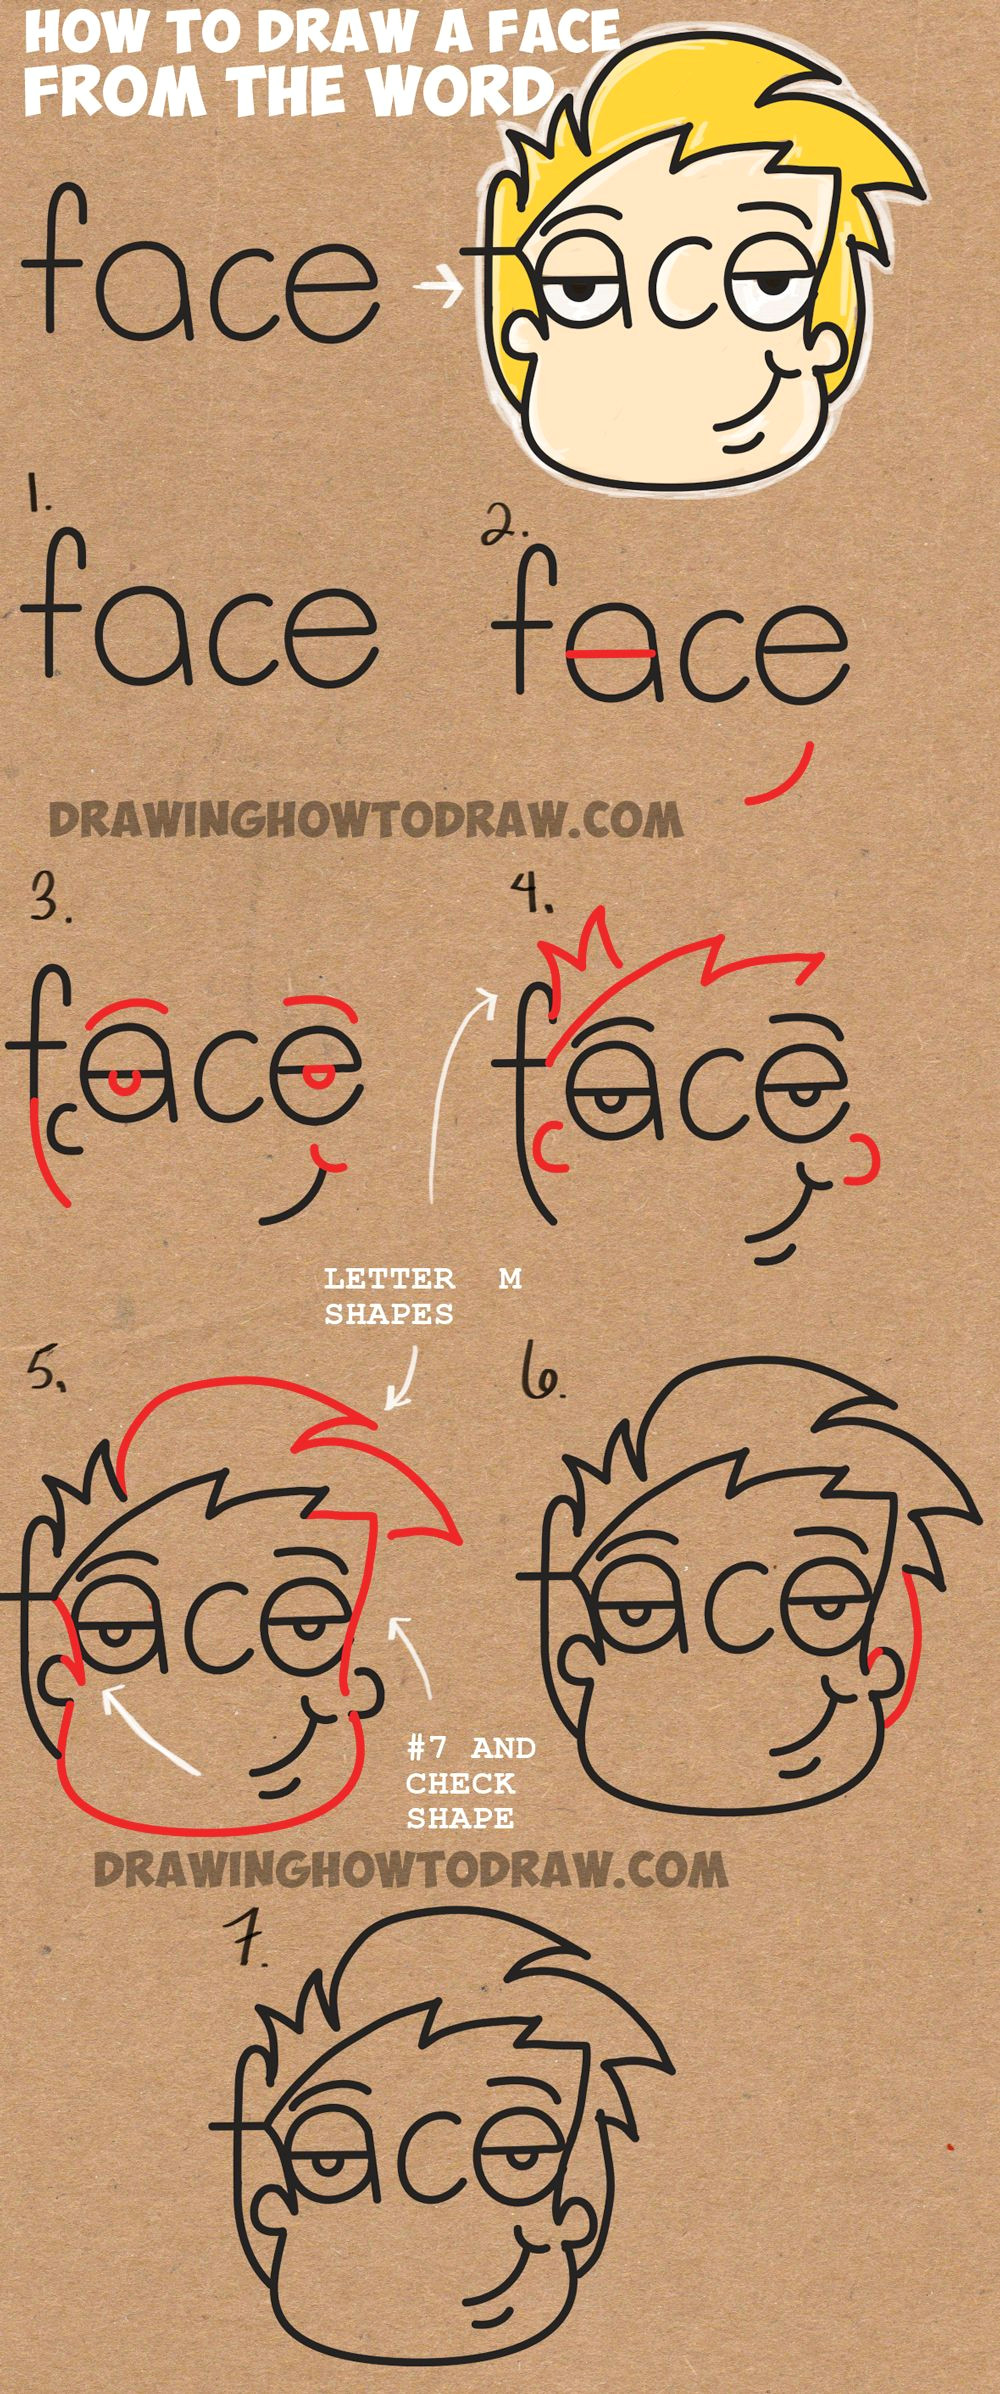 Drawing Cartoons Letter by Letter How to Draw Cartoon Faces From the Word Face Easy Step by Step